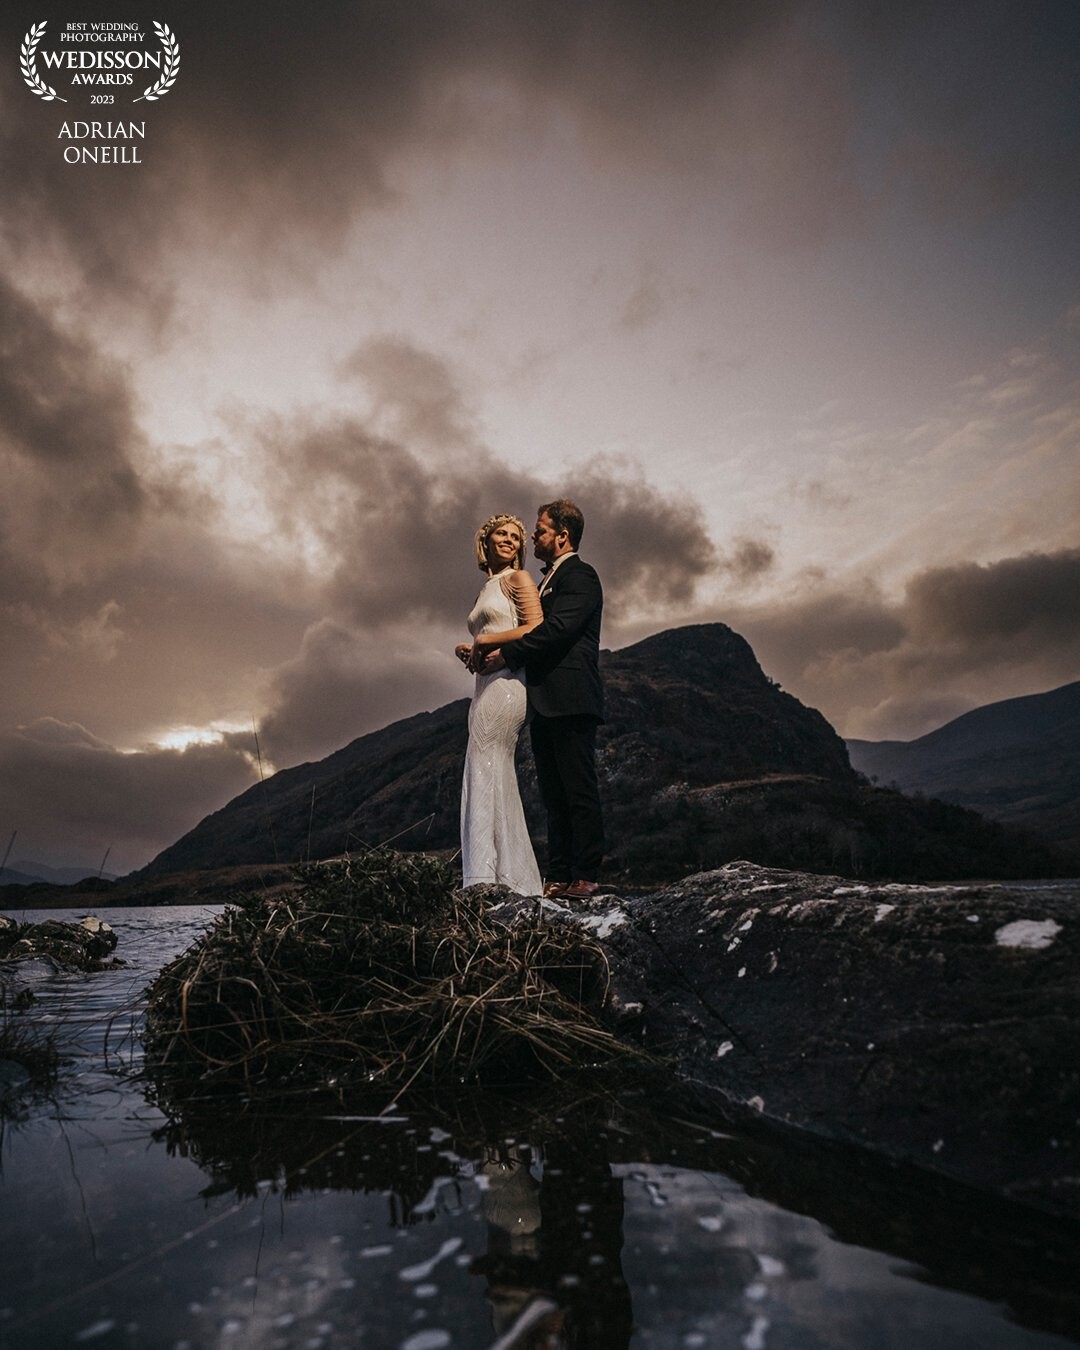 Another shot from the Killarney shoot, Catching the last of the winter sun light, helps to know the good spots where you get the last good light. The winter weddings can always be challenging. But having the right couple in the right location its pure magic.